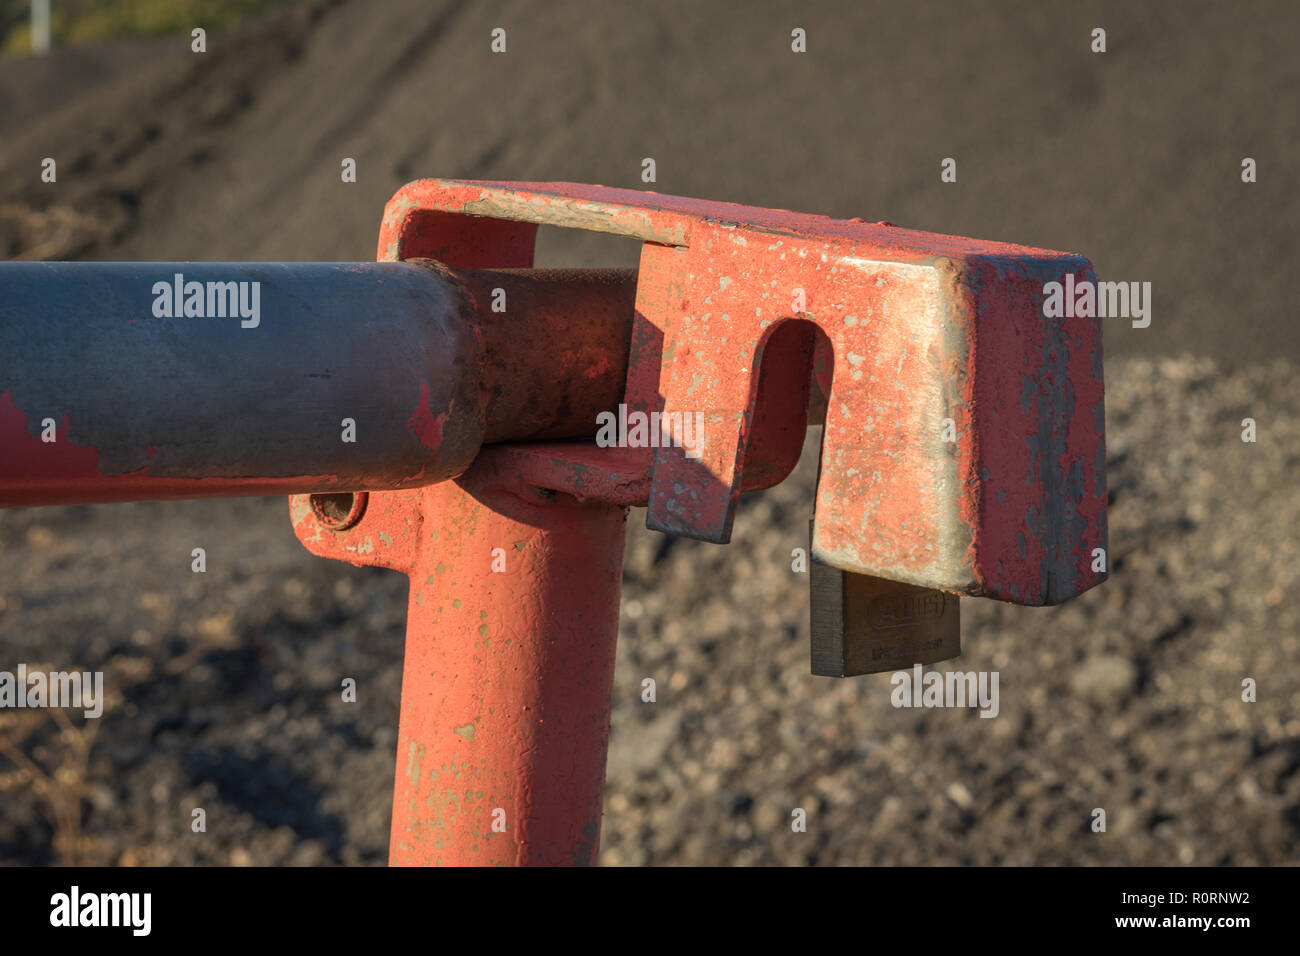 Schlagbaum High Resolution Stock Photography and Images - Alamy